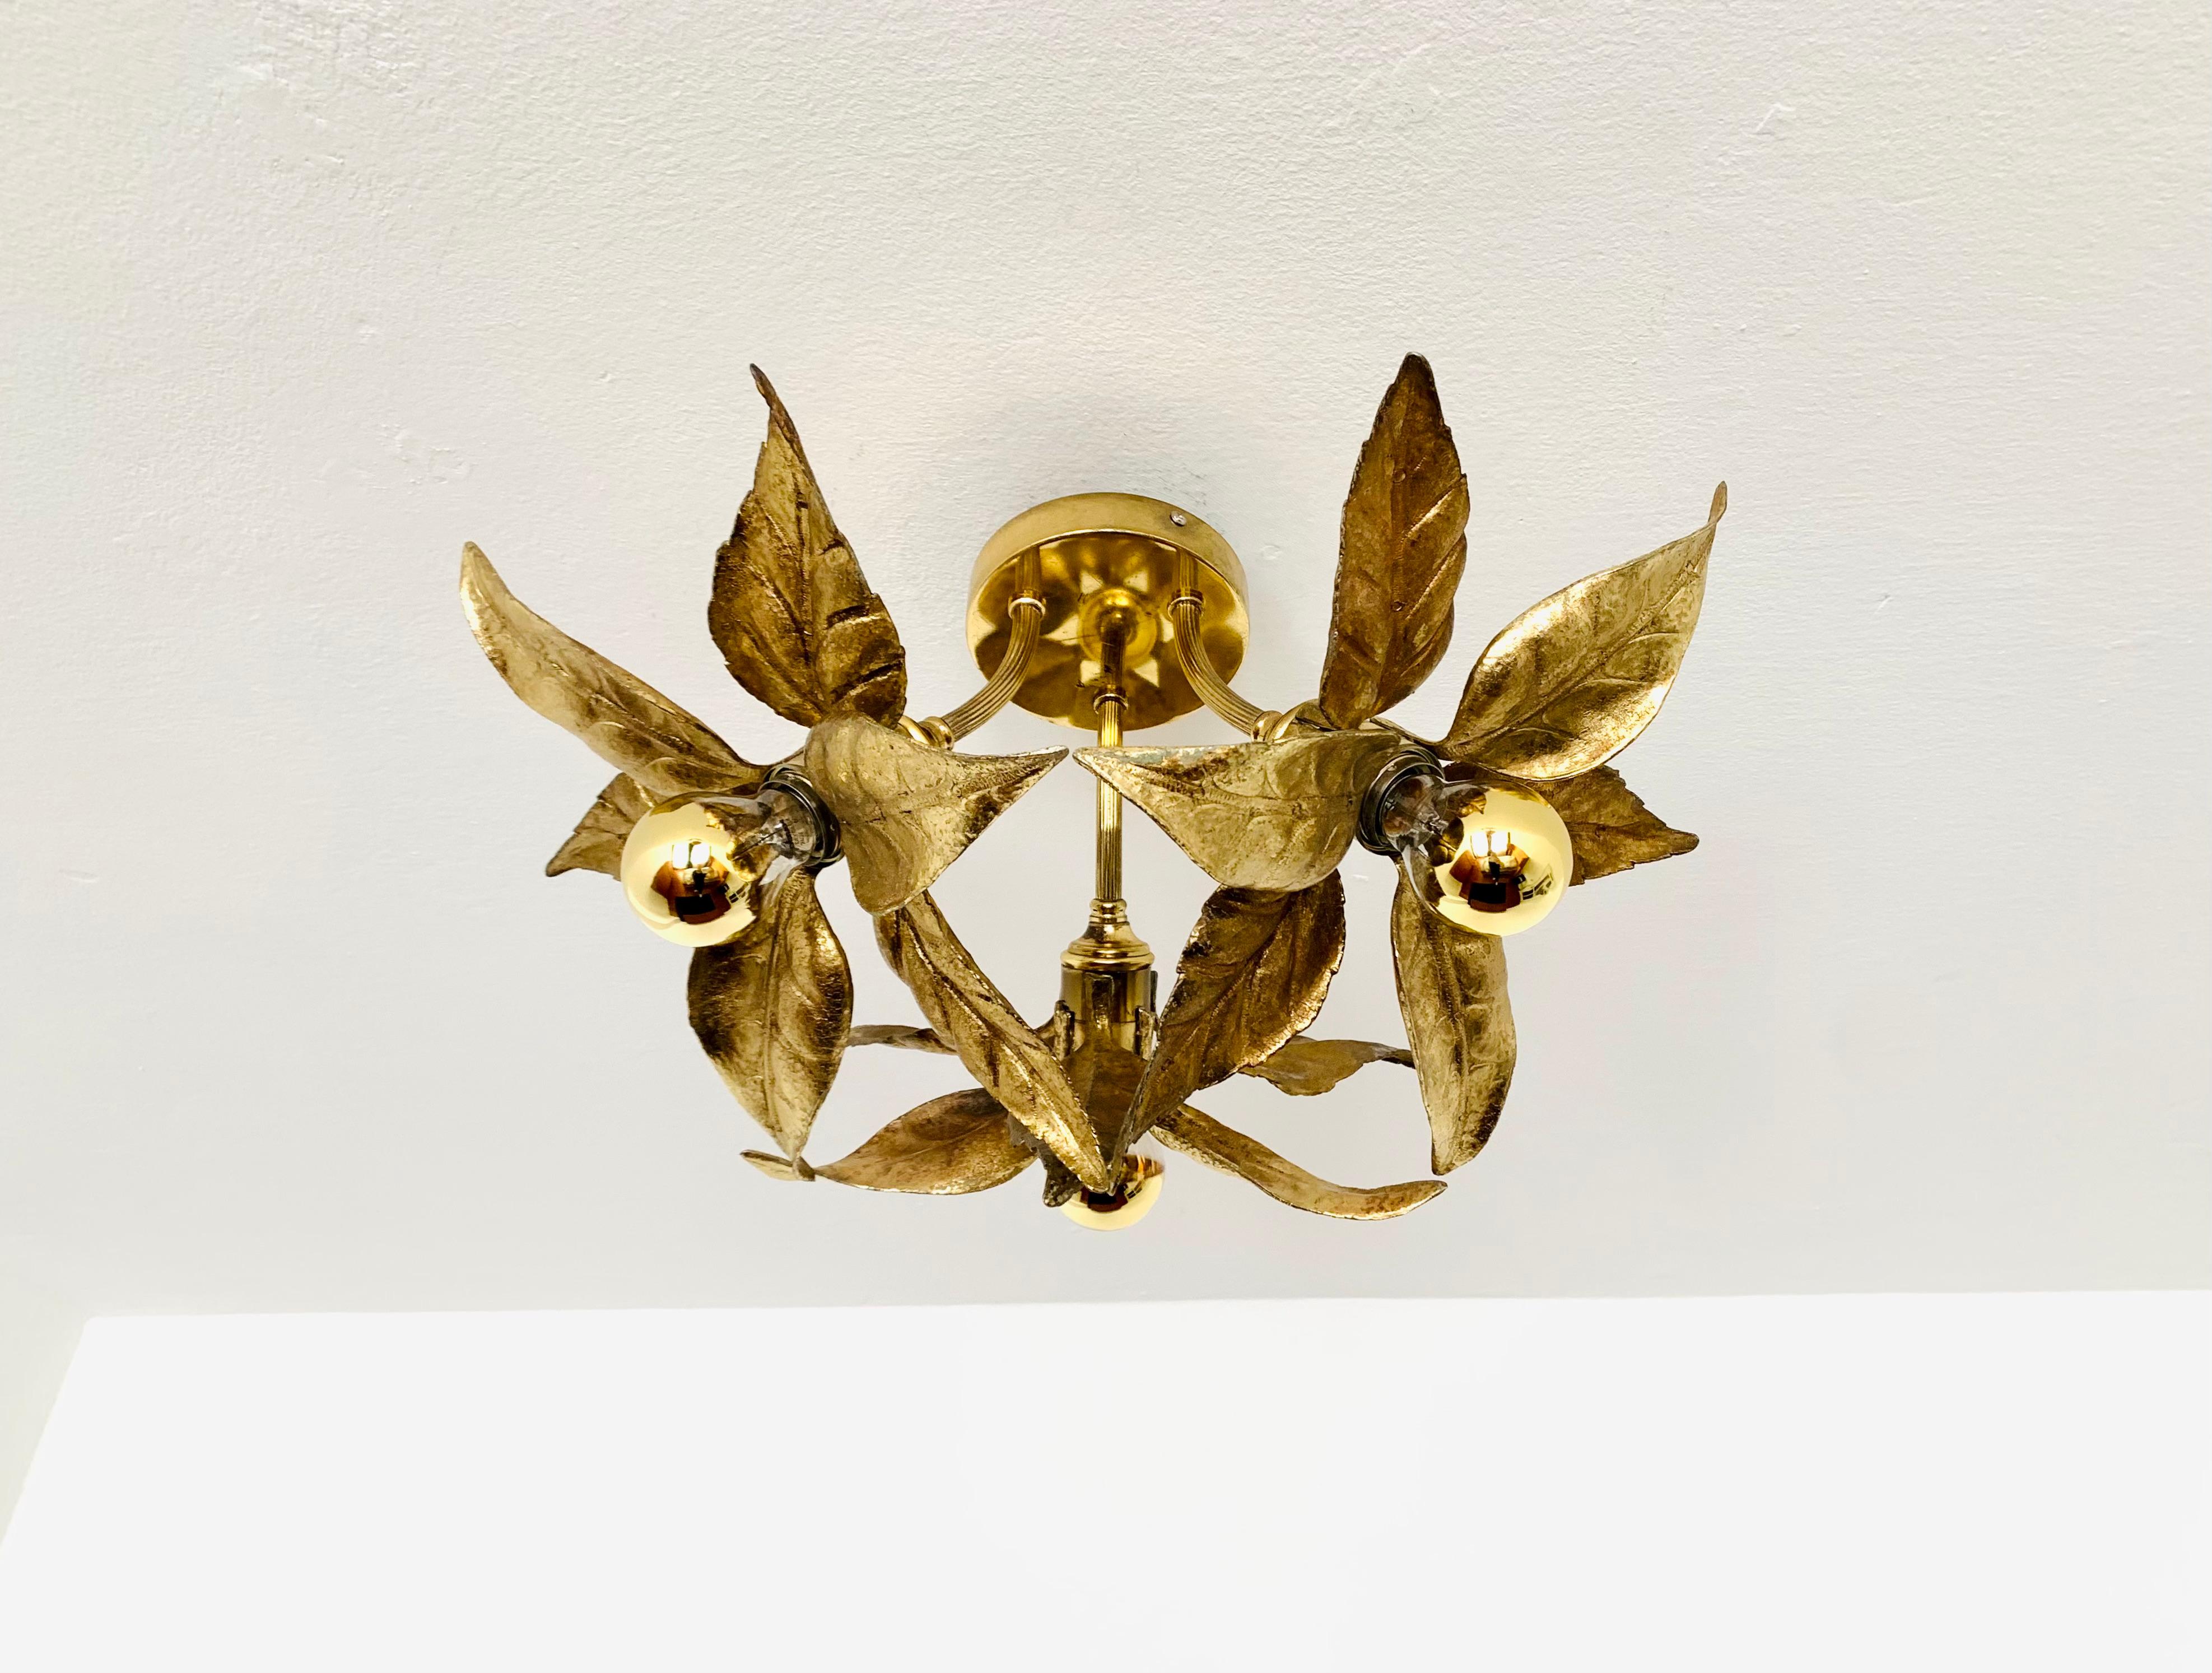 Exceptionally decorative floral ceiling lamp from the 1960s.
Great design and very solid workmanship.
The leaves create a spectacular light.

Design: Willy Daro
Manufacturer: Massive

Condition:

Very good vintage condition with slight